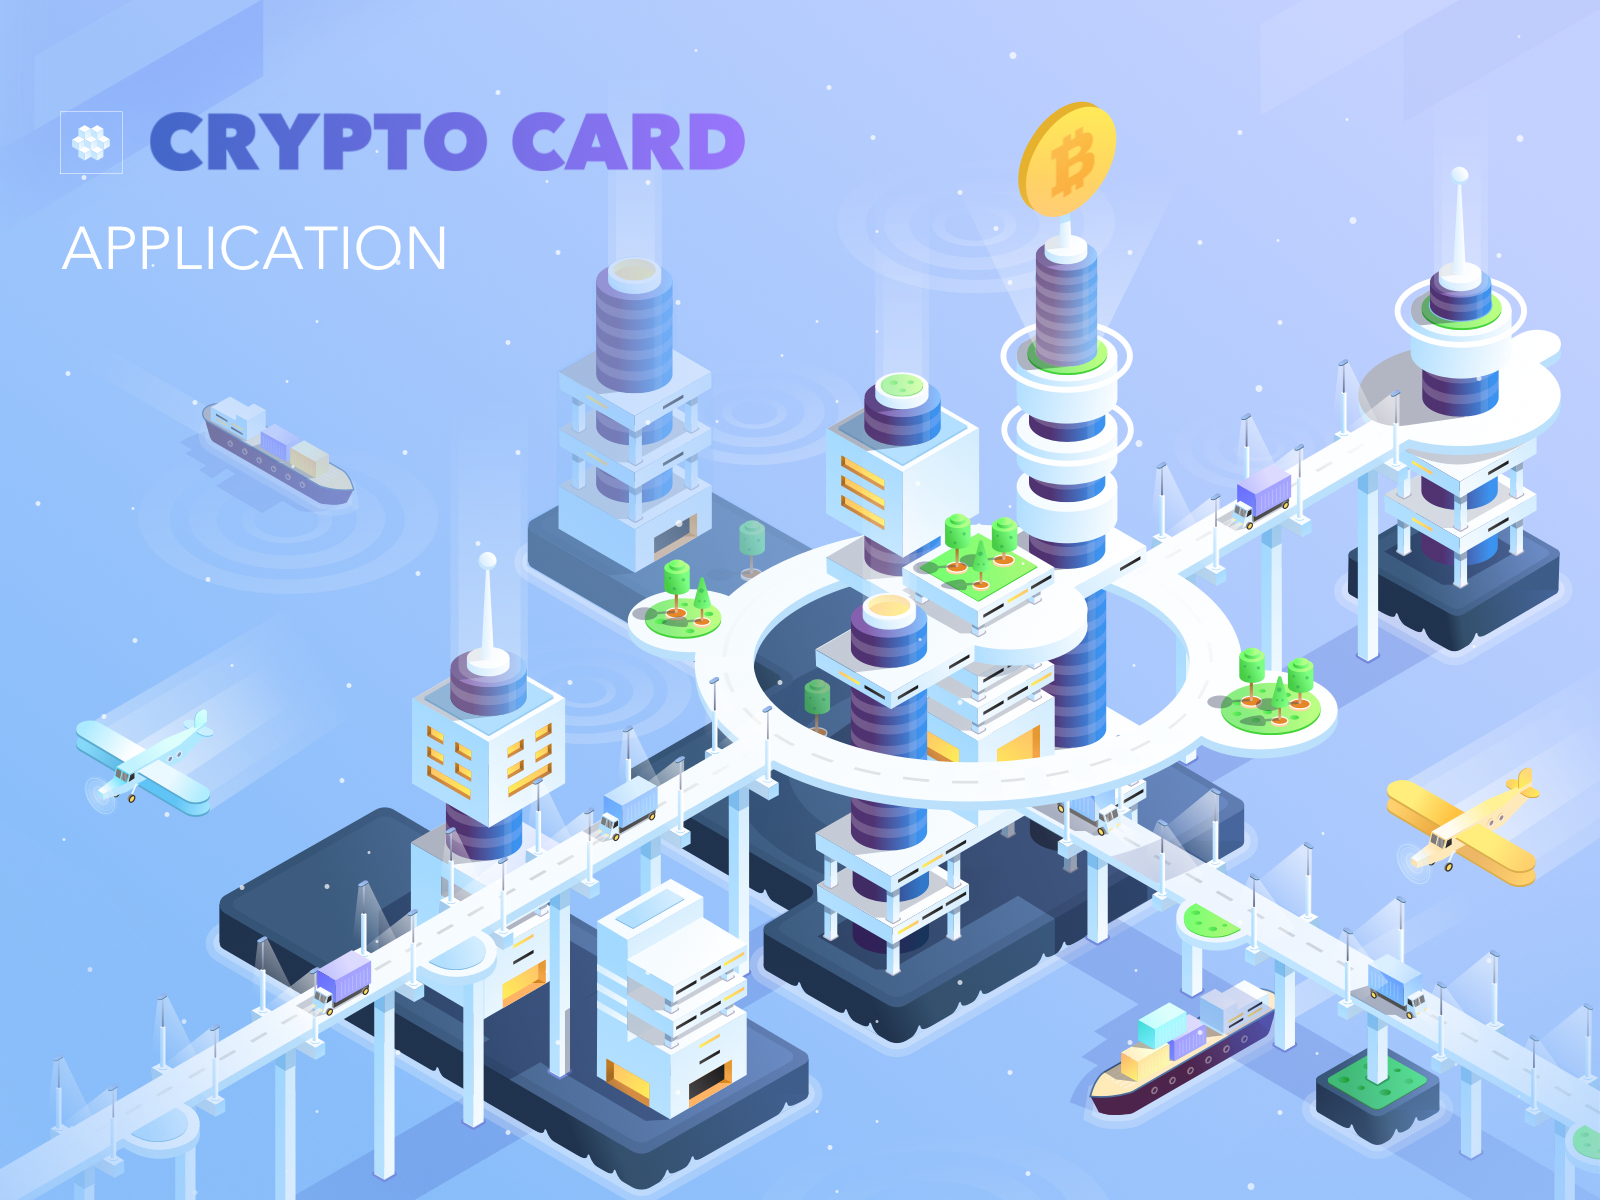 Crypto currency world illustration by Varti Studio on Dribbble